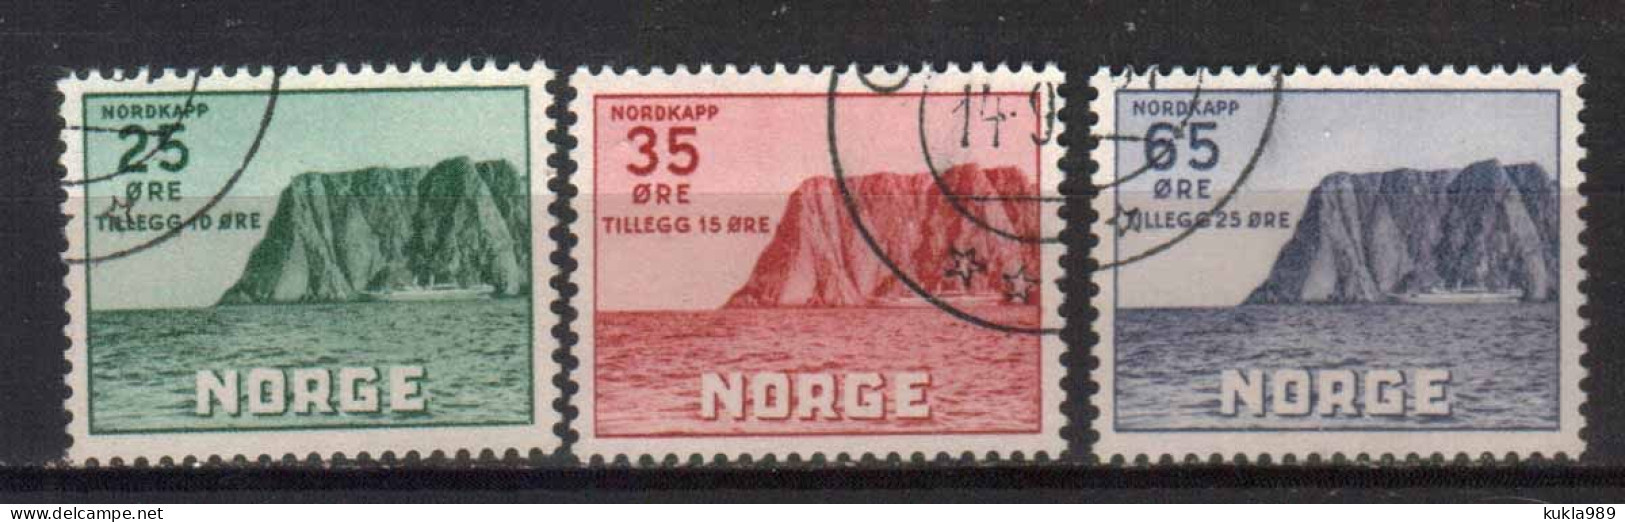 NORWAY STAMPS, 1930, Sc.#B1-B3, USED - Used Stamps